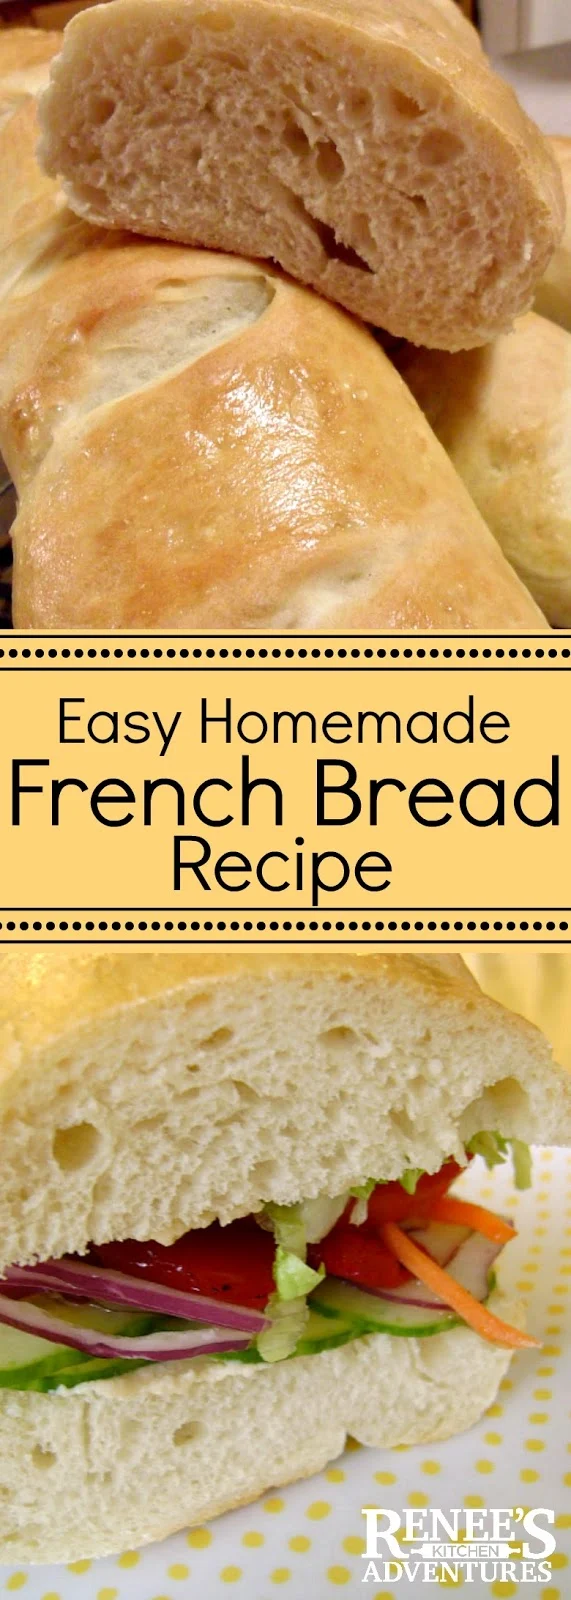 Easy Homemade French Bread Recipe| by Renee's Kitchen Adventures - easy recipe for homemade French Bread baked in your own oven! #frenchbread #bread #breadrecipe #easyrecipe #easybreadrecipe #homemadebread